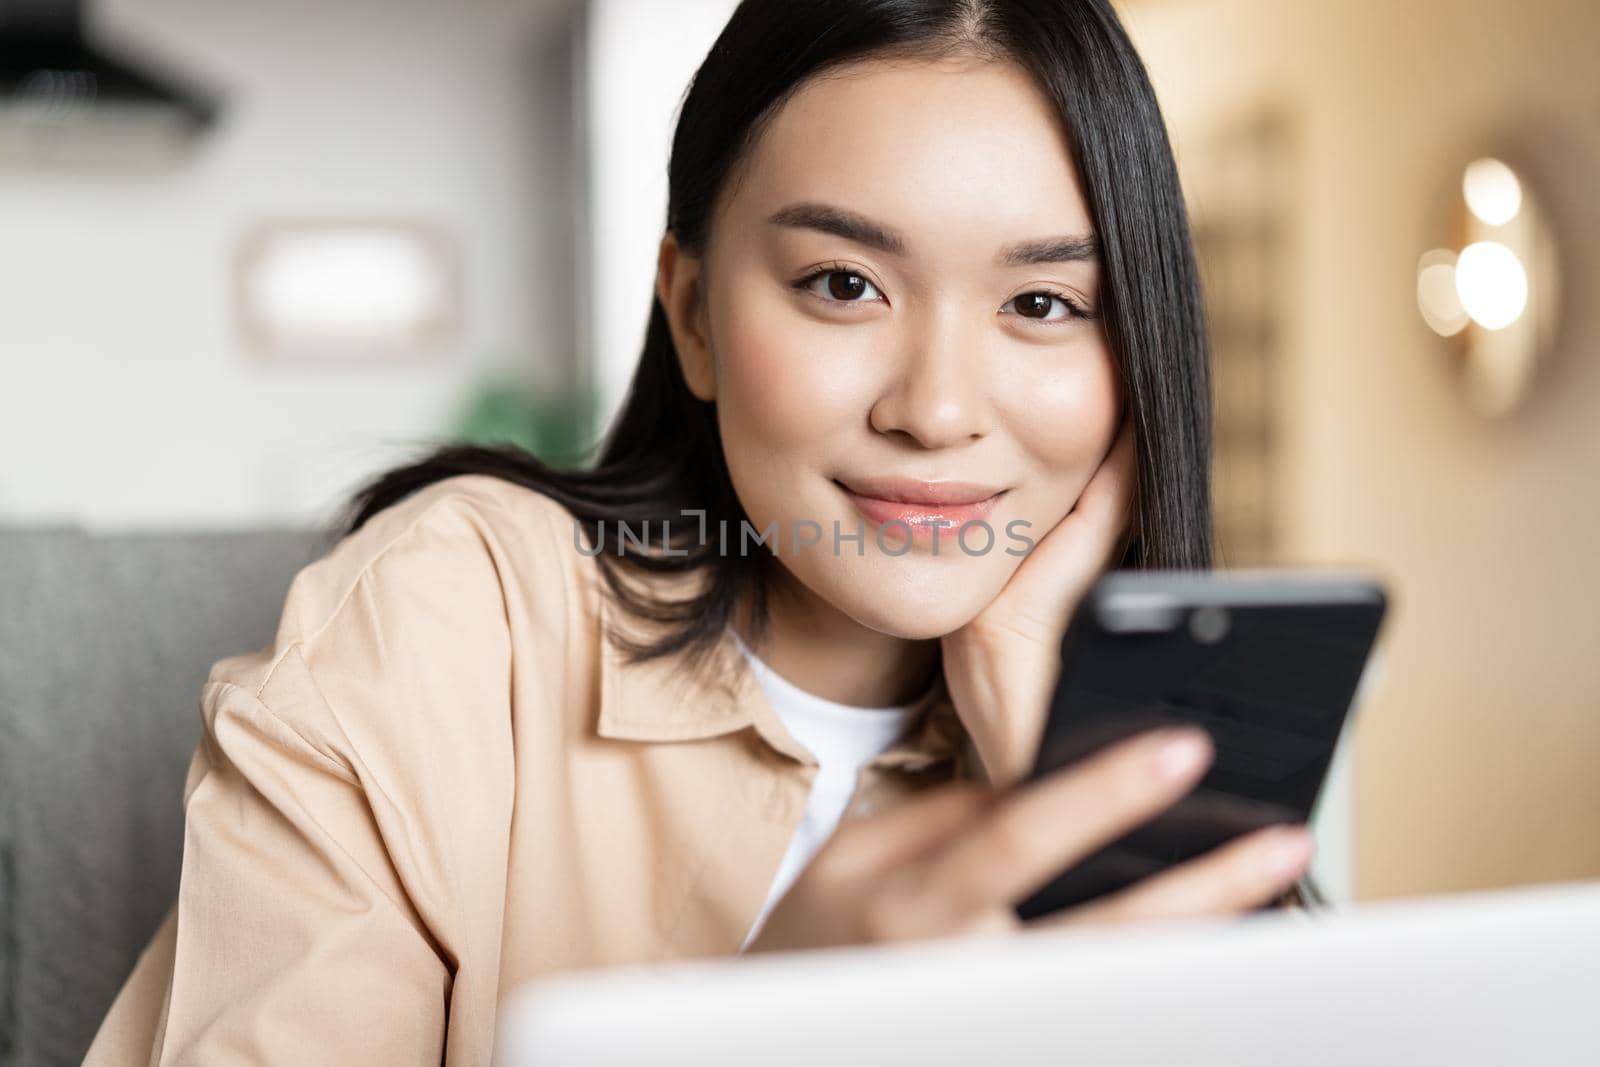 Smiling asian woman working from home on laptop, looking at smartphone.